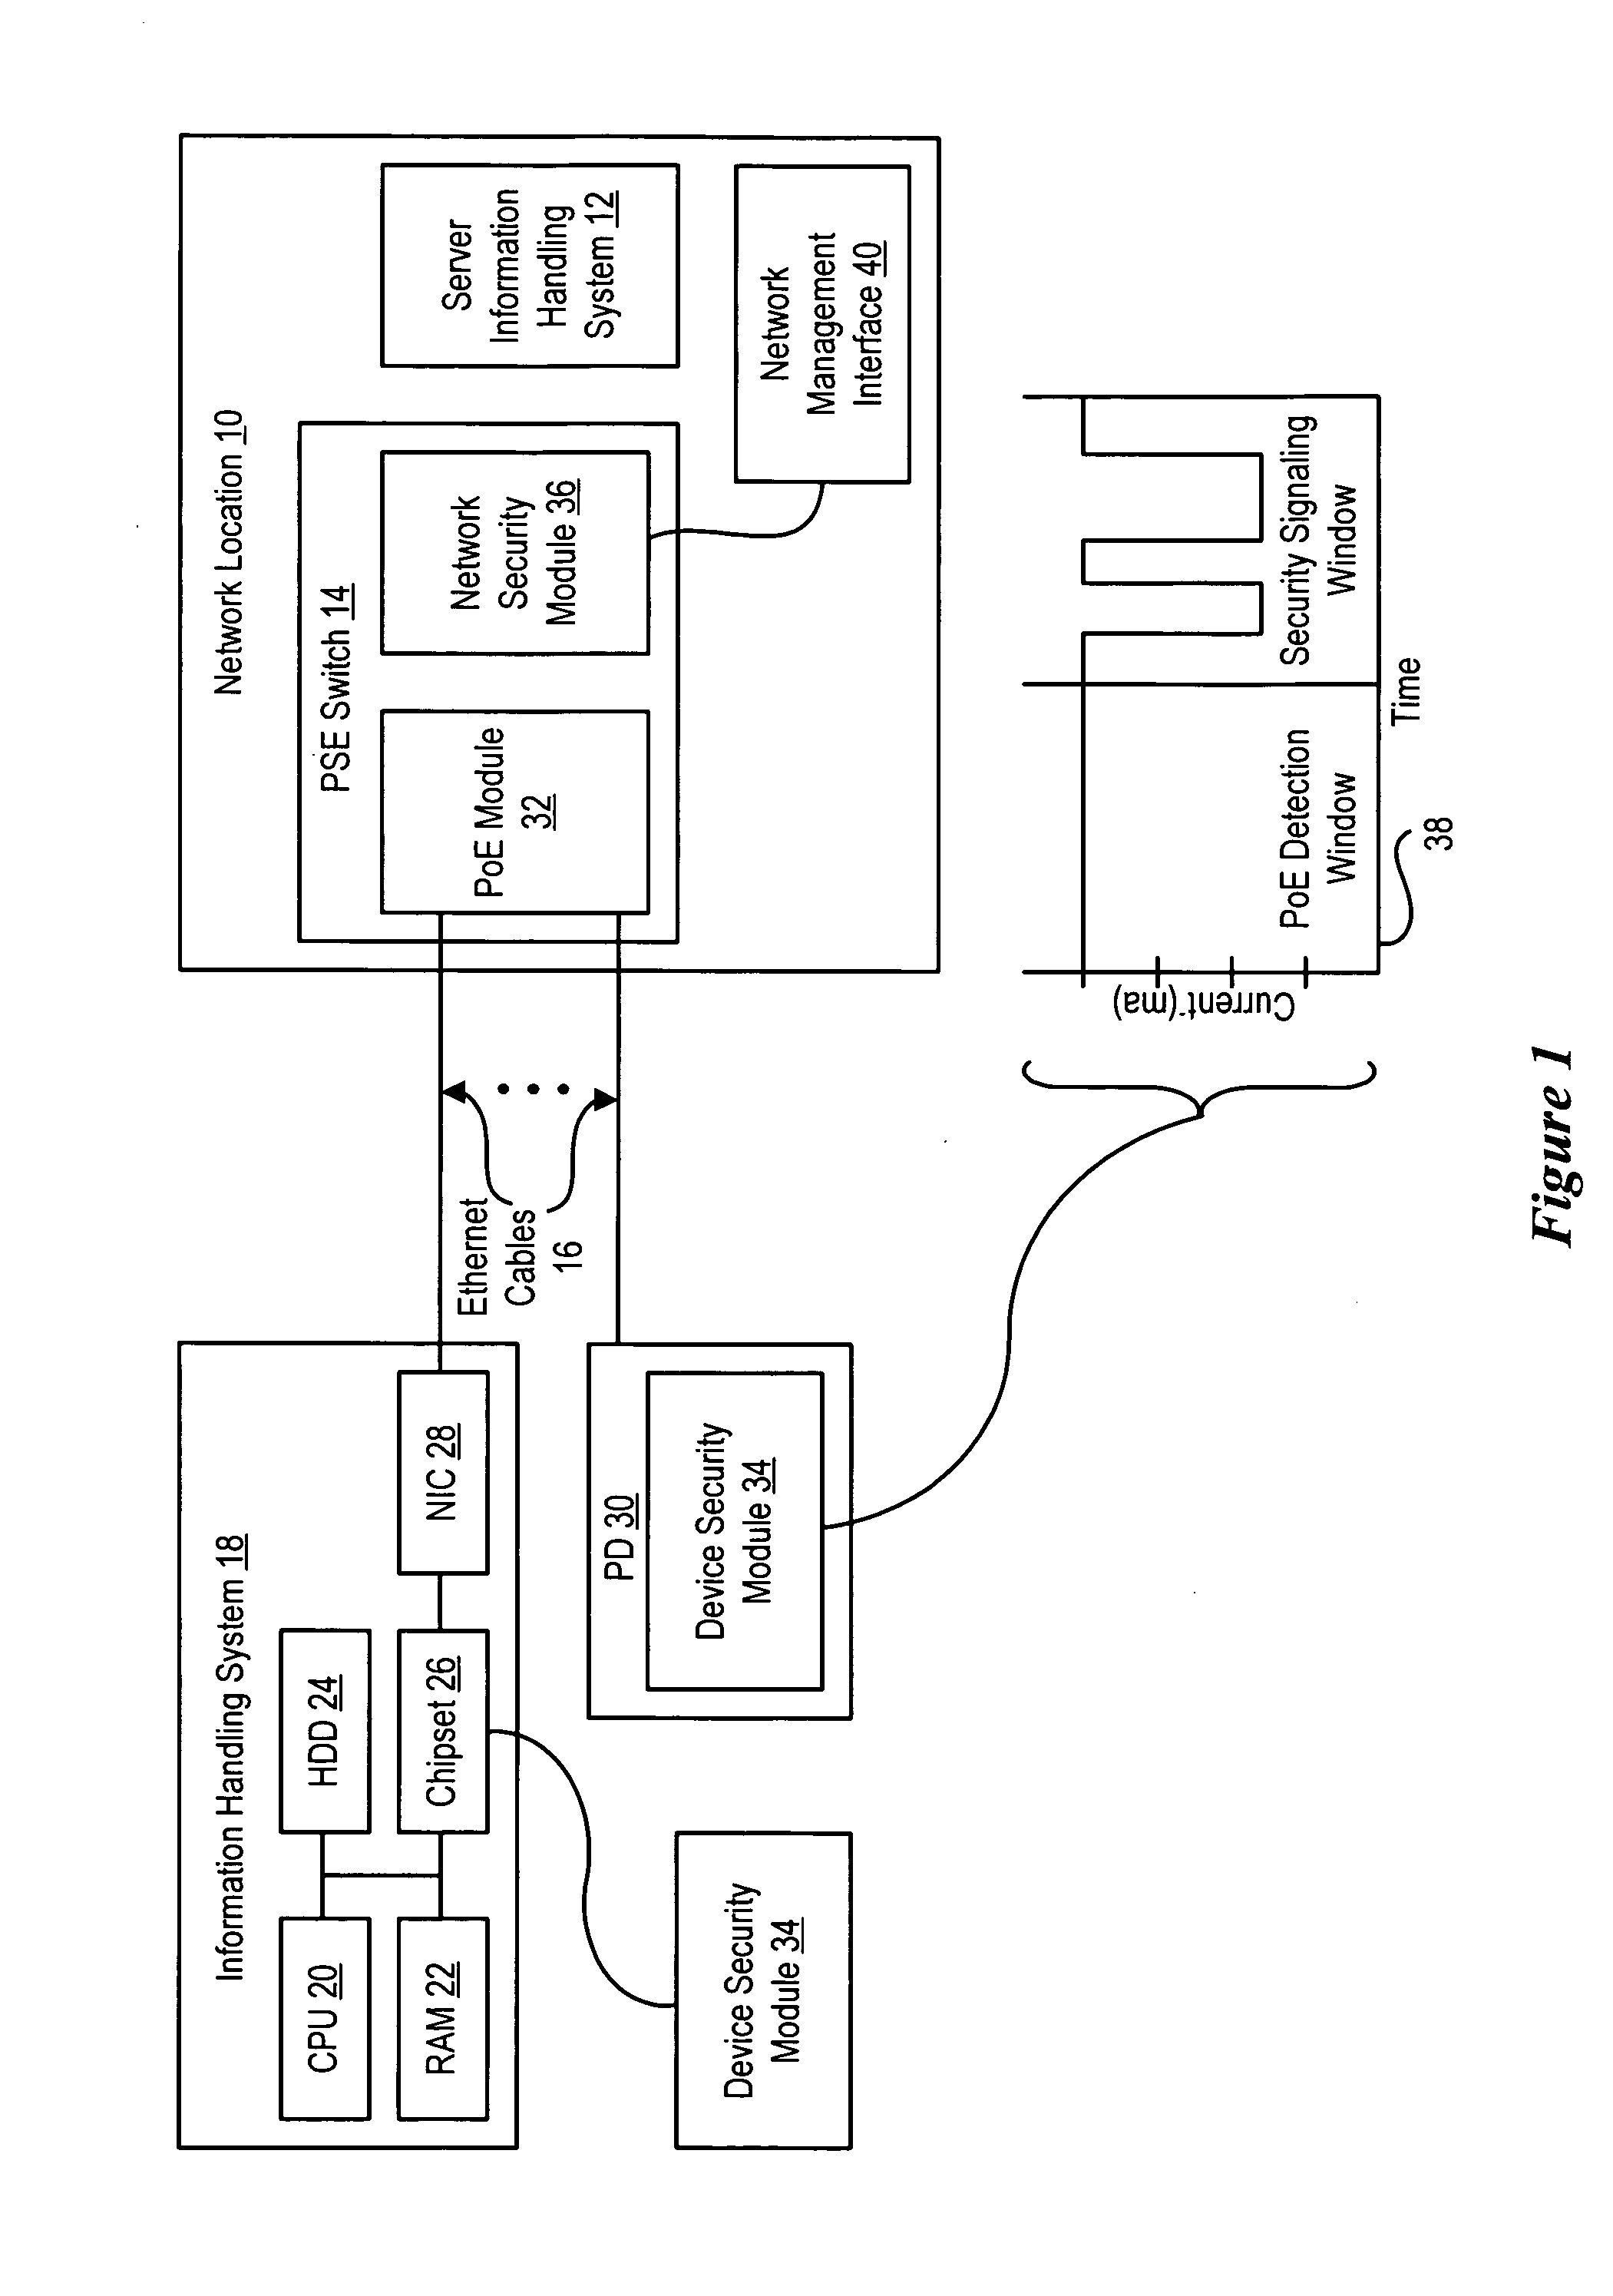 System and method for power over ethernet signaling